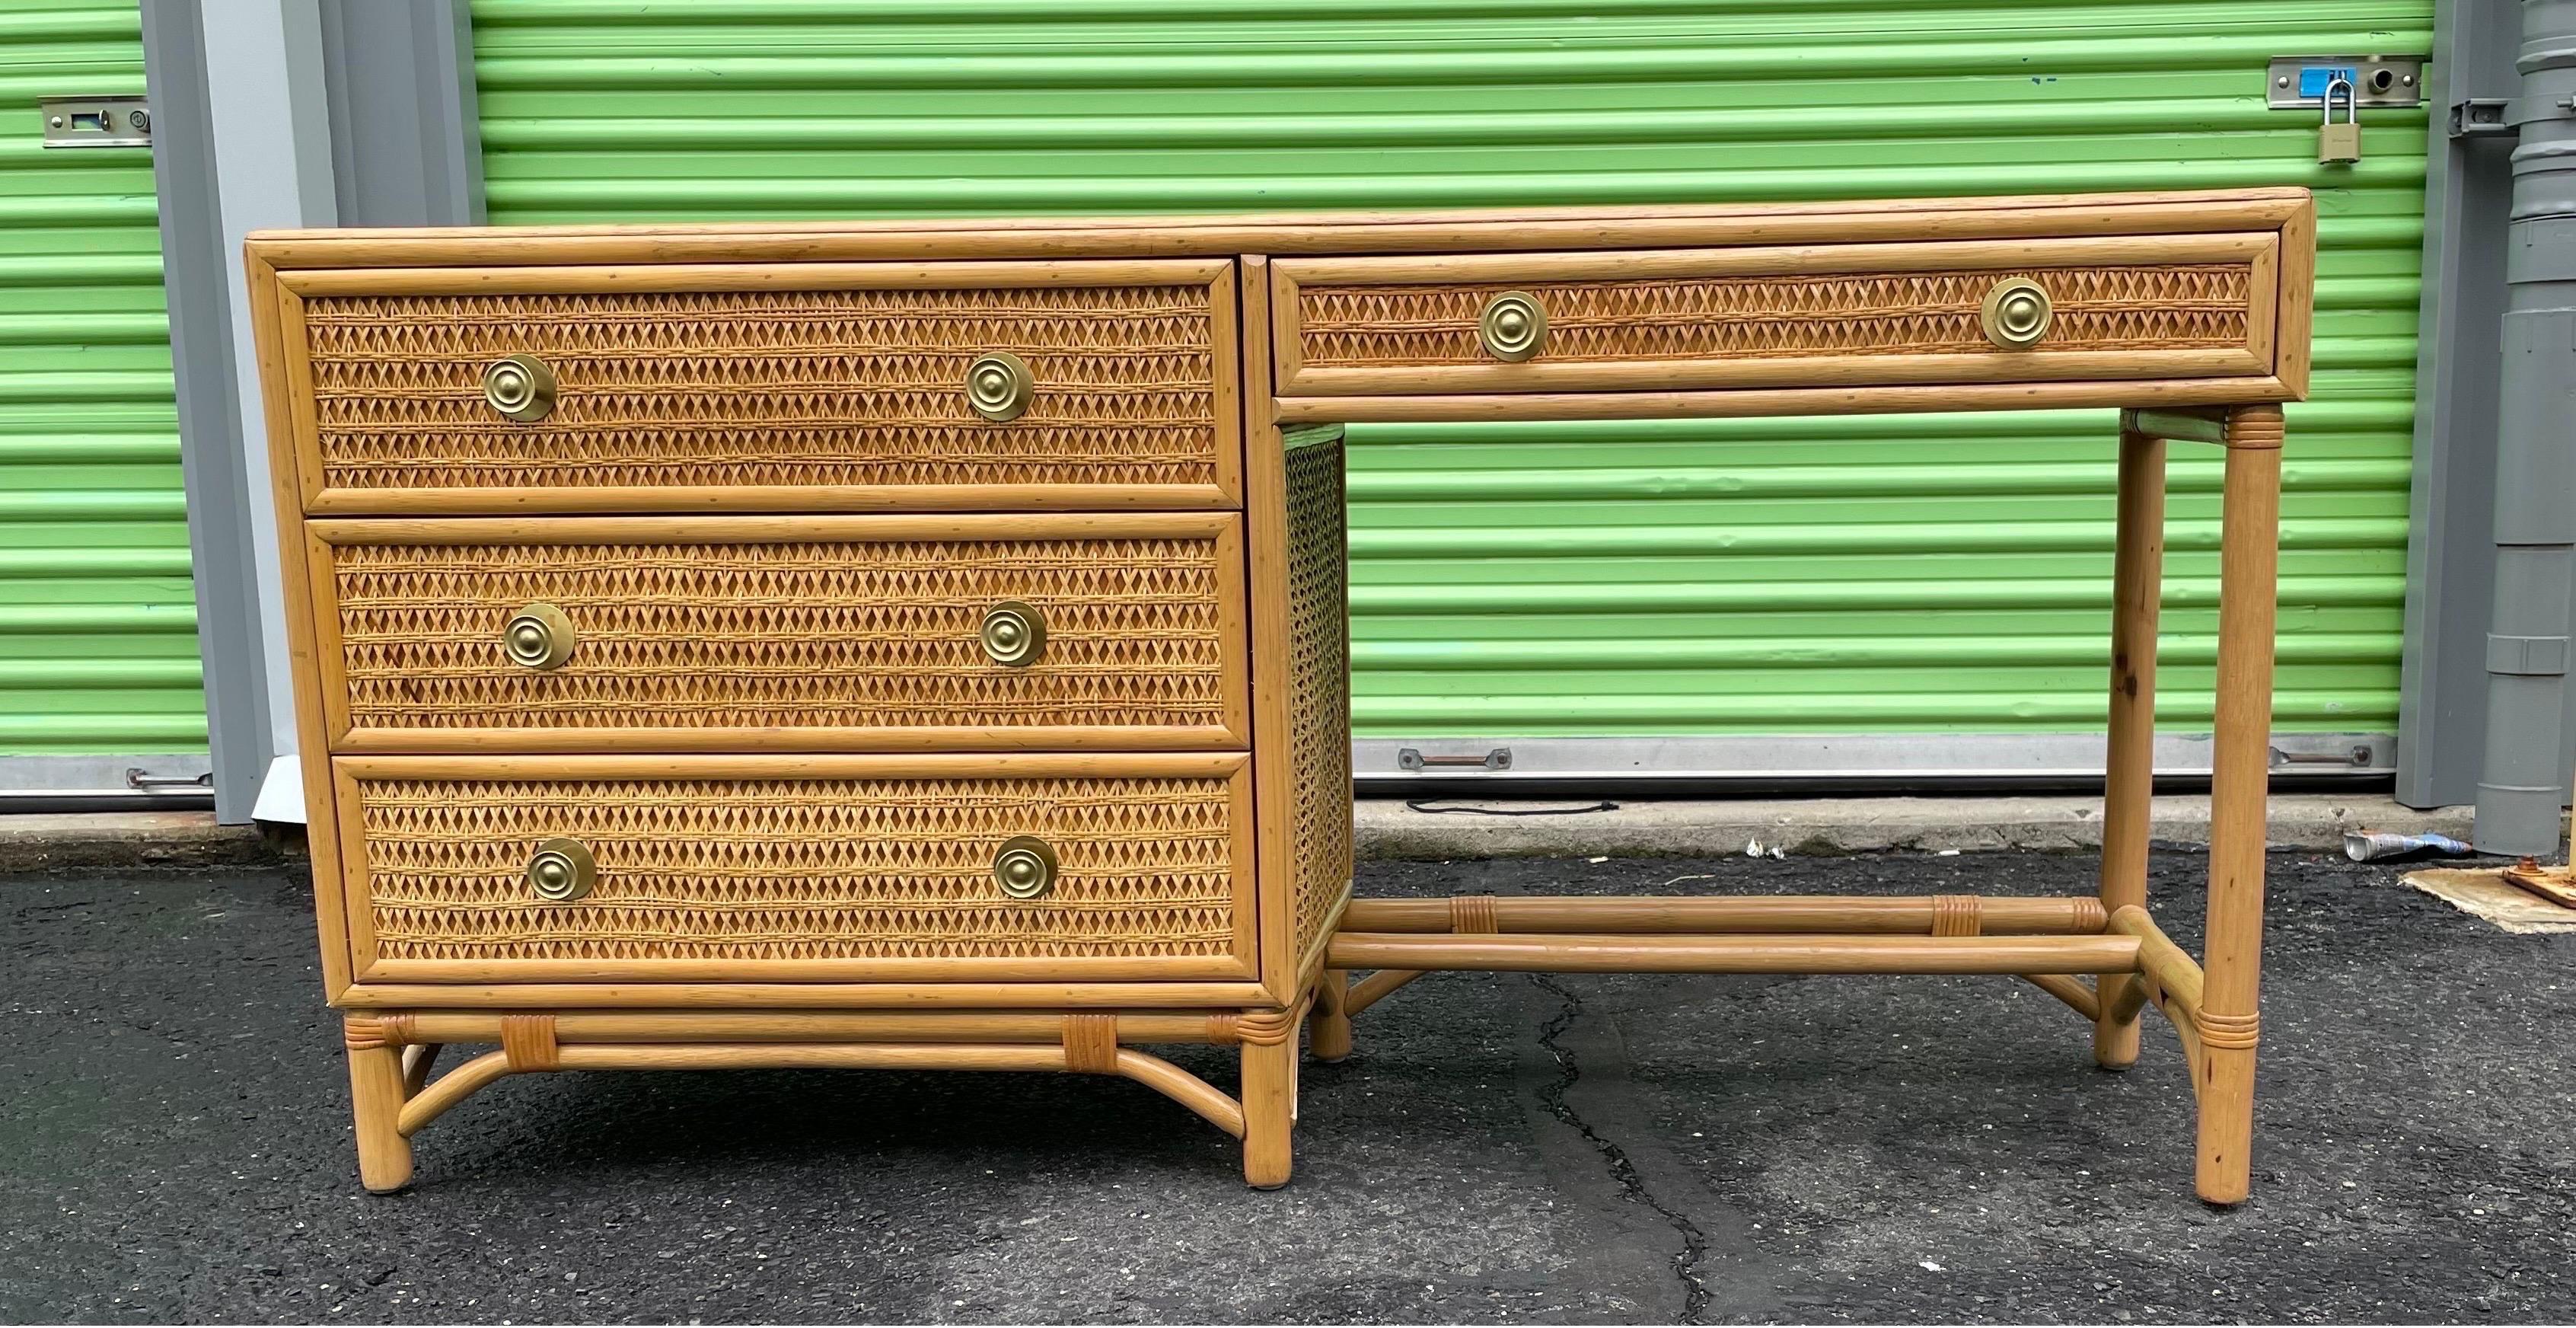 Fantastic vintage writing desk or vanity with rattan chair. Unusual piece because it has an attached chest of drawers. Beautifully caned design in the manner of Chirstian Dior & Gabriella Crespi. Glass tops to protect and offer writing area or